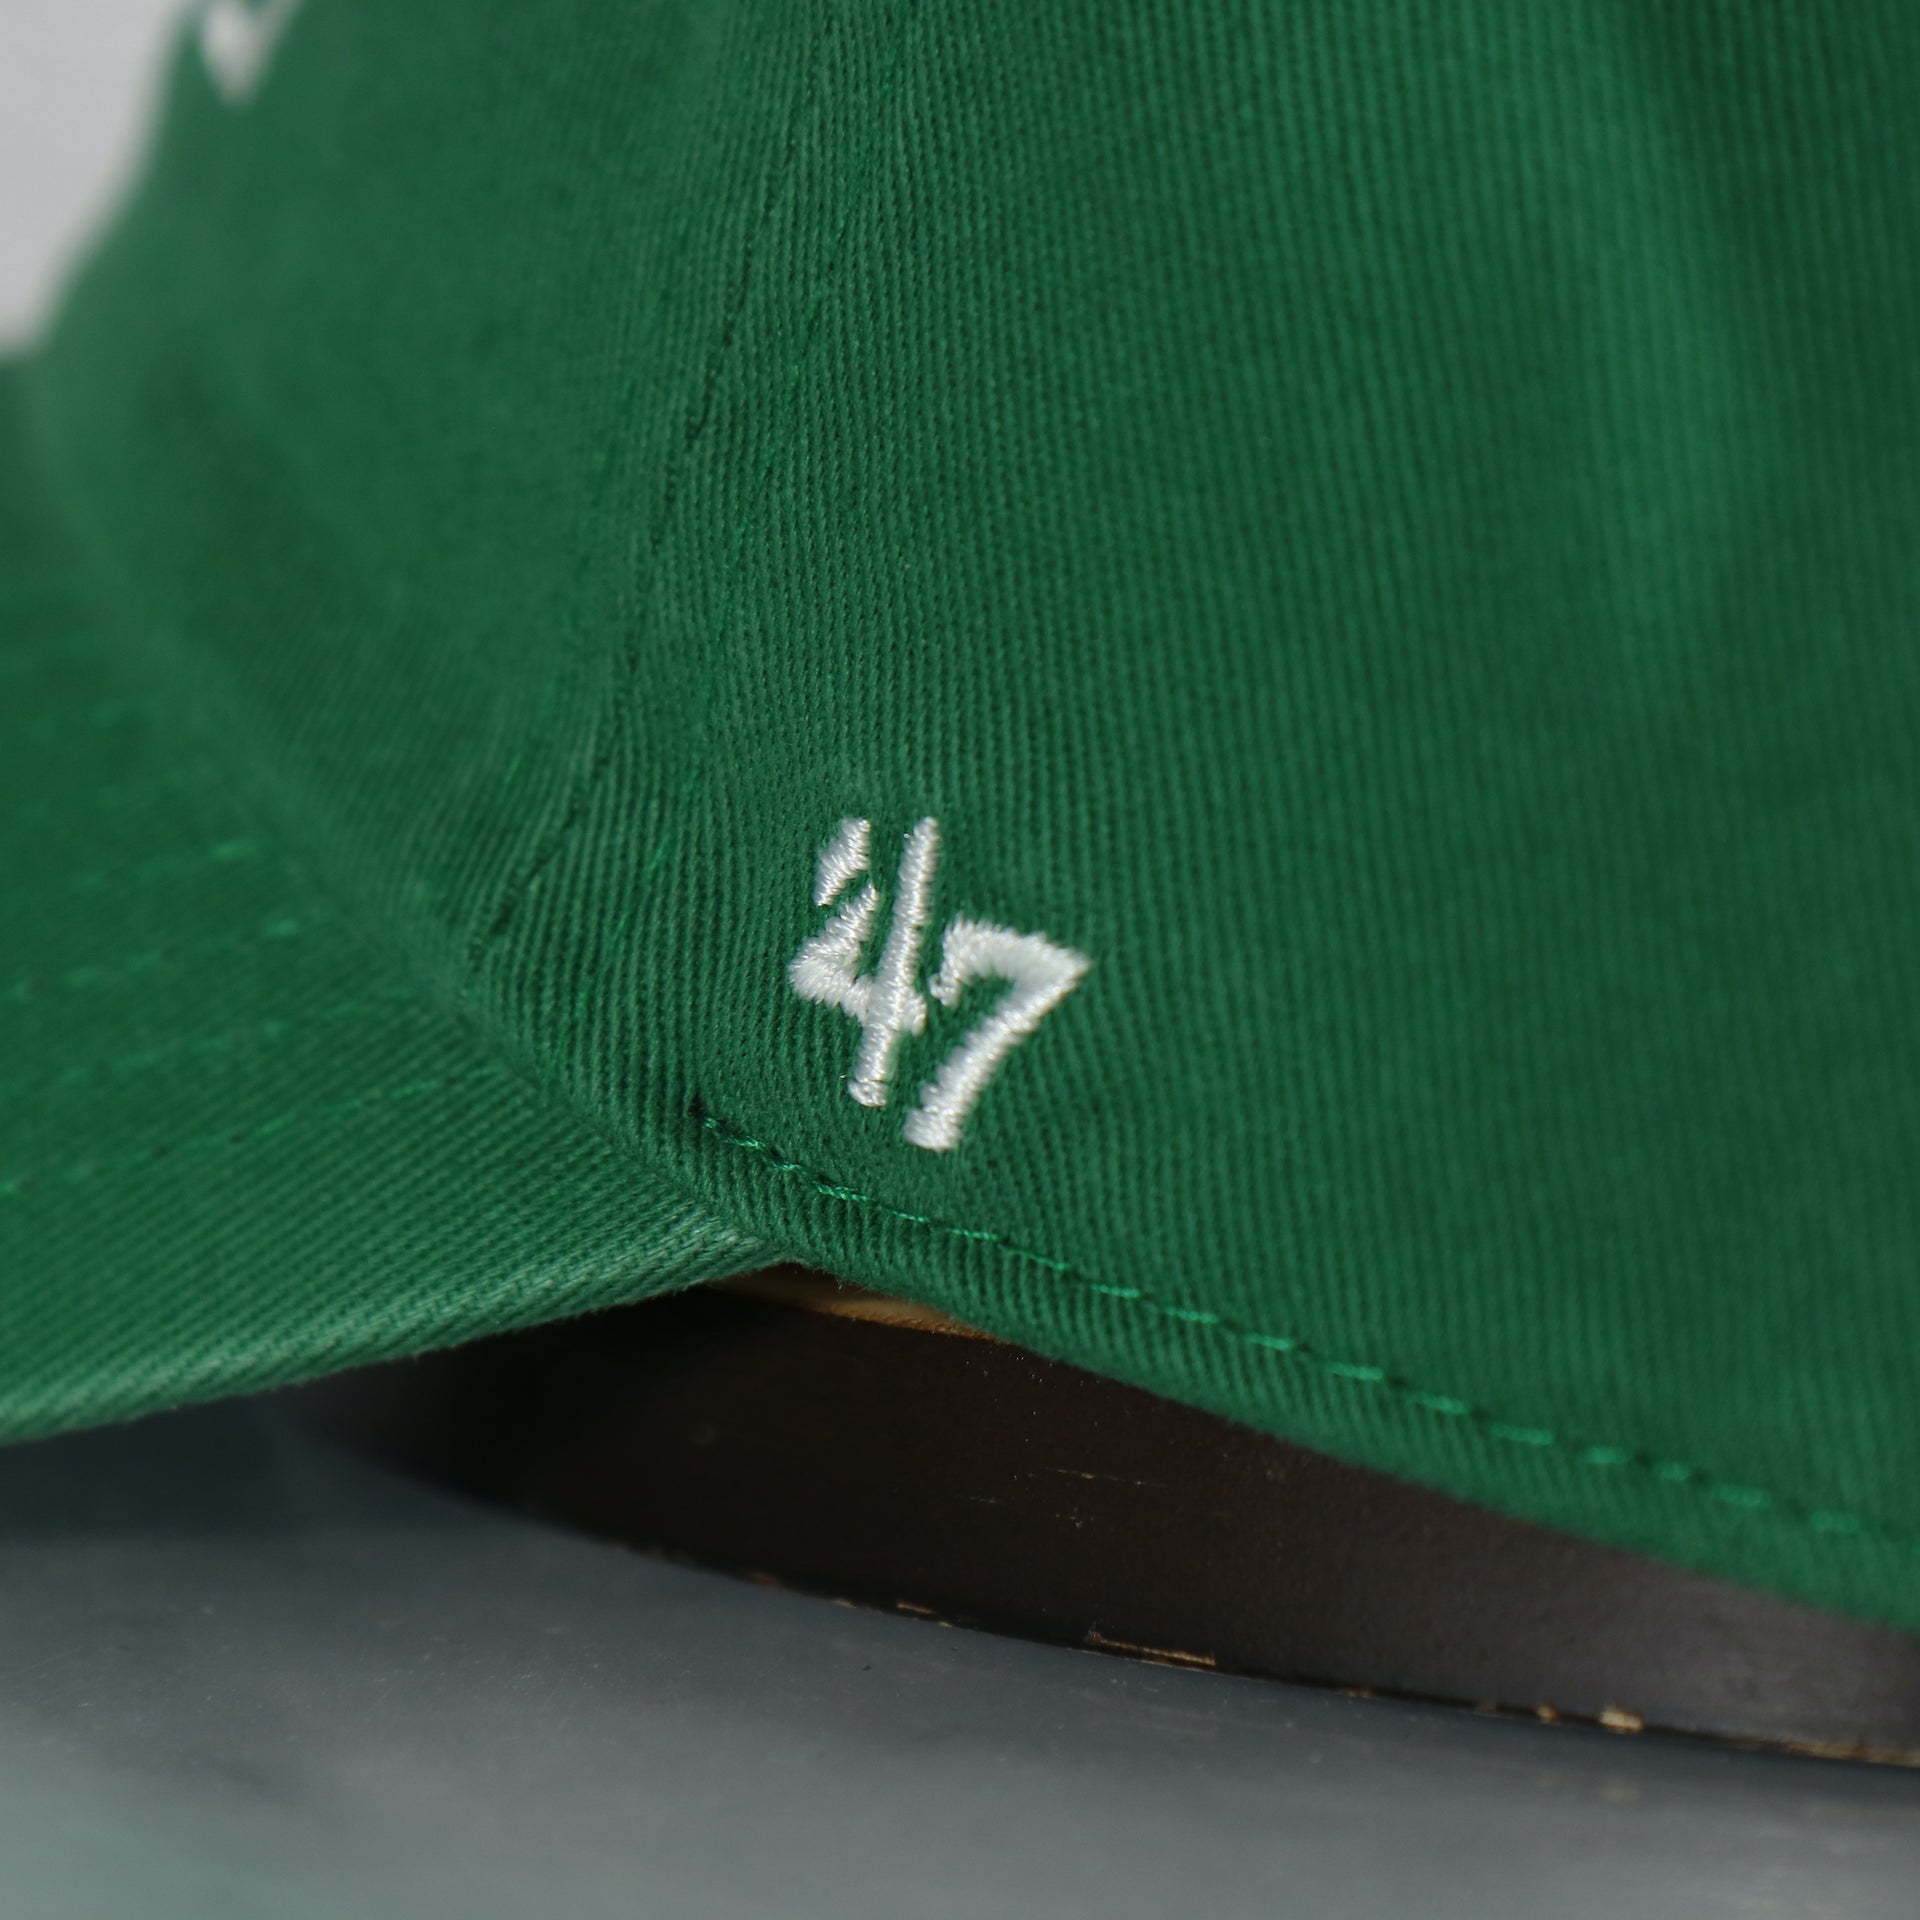 Close up of the '47 logo on the Philadelphia Eagles Throwback Logo "Fly Eagles Fly" Kelly Green Retro Clean Up Dad Hat